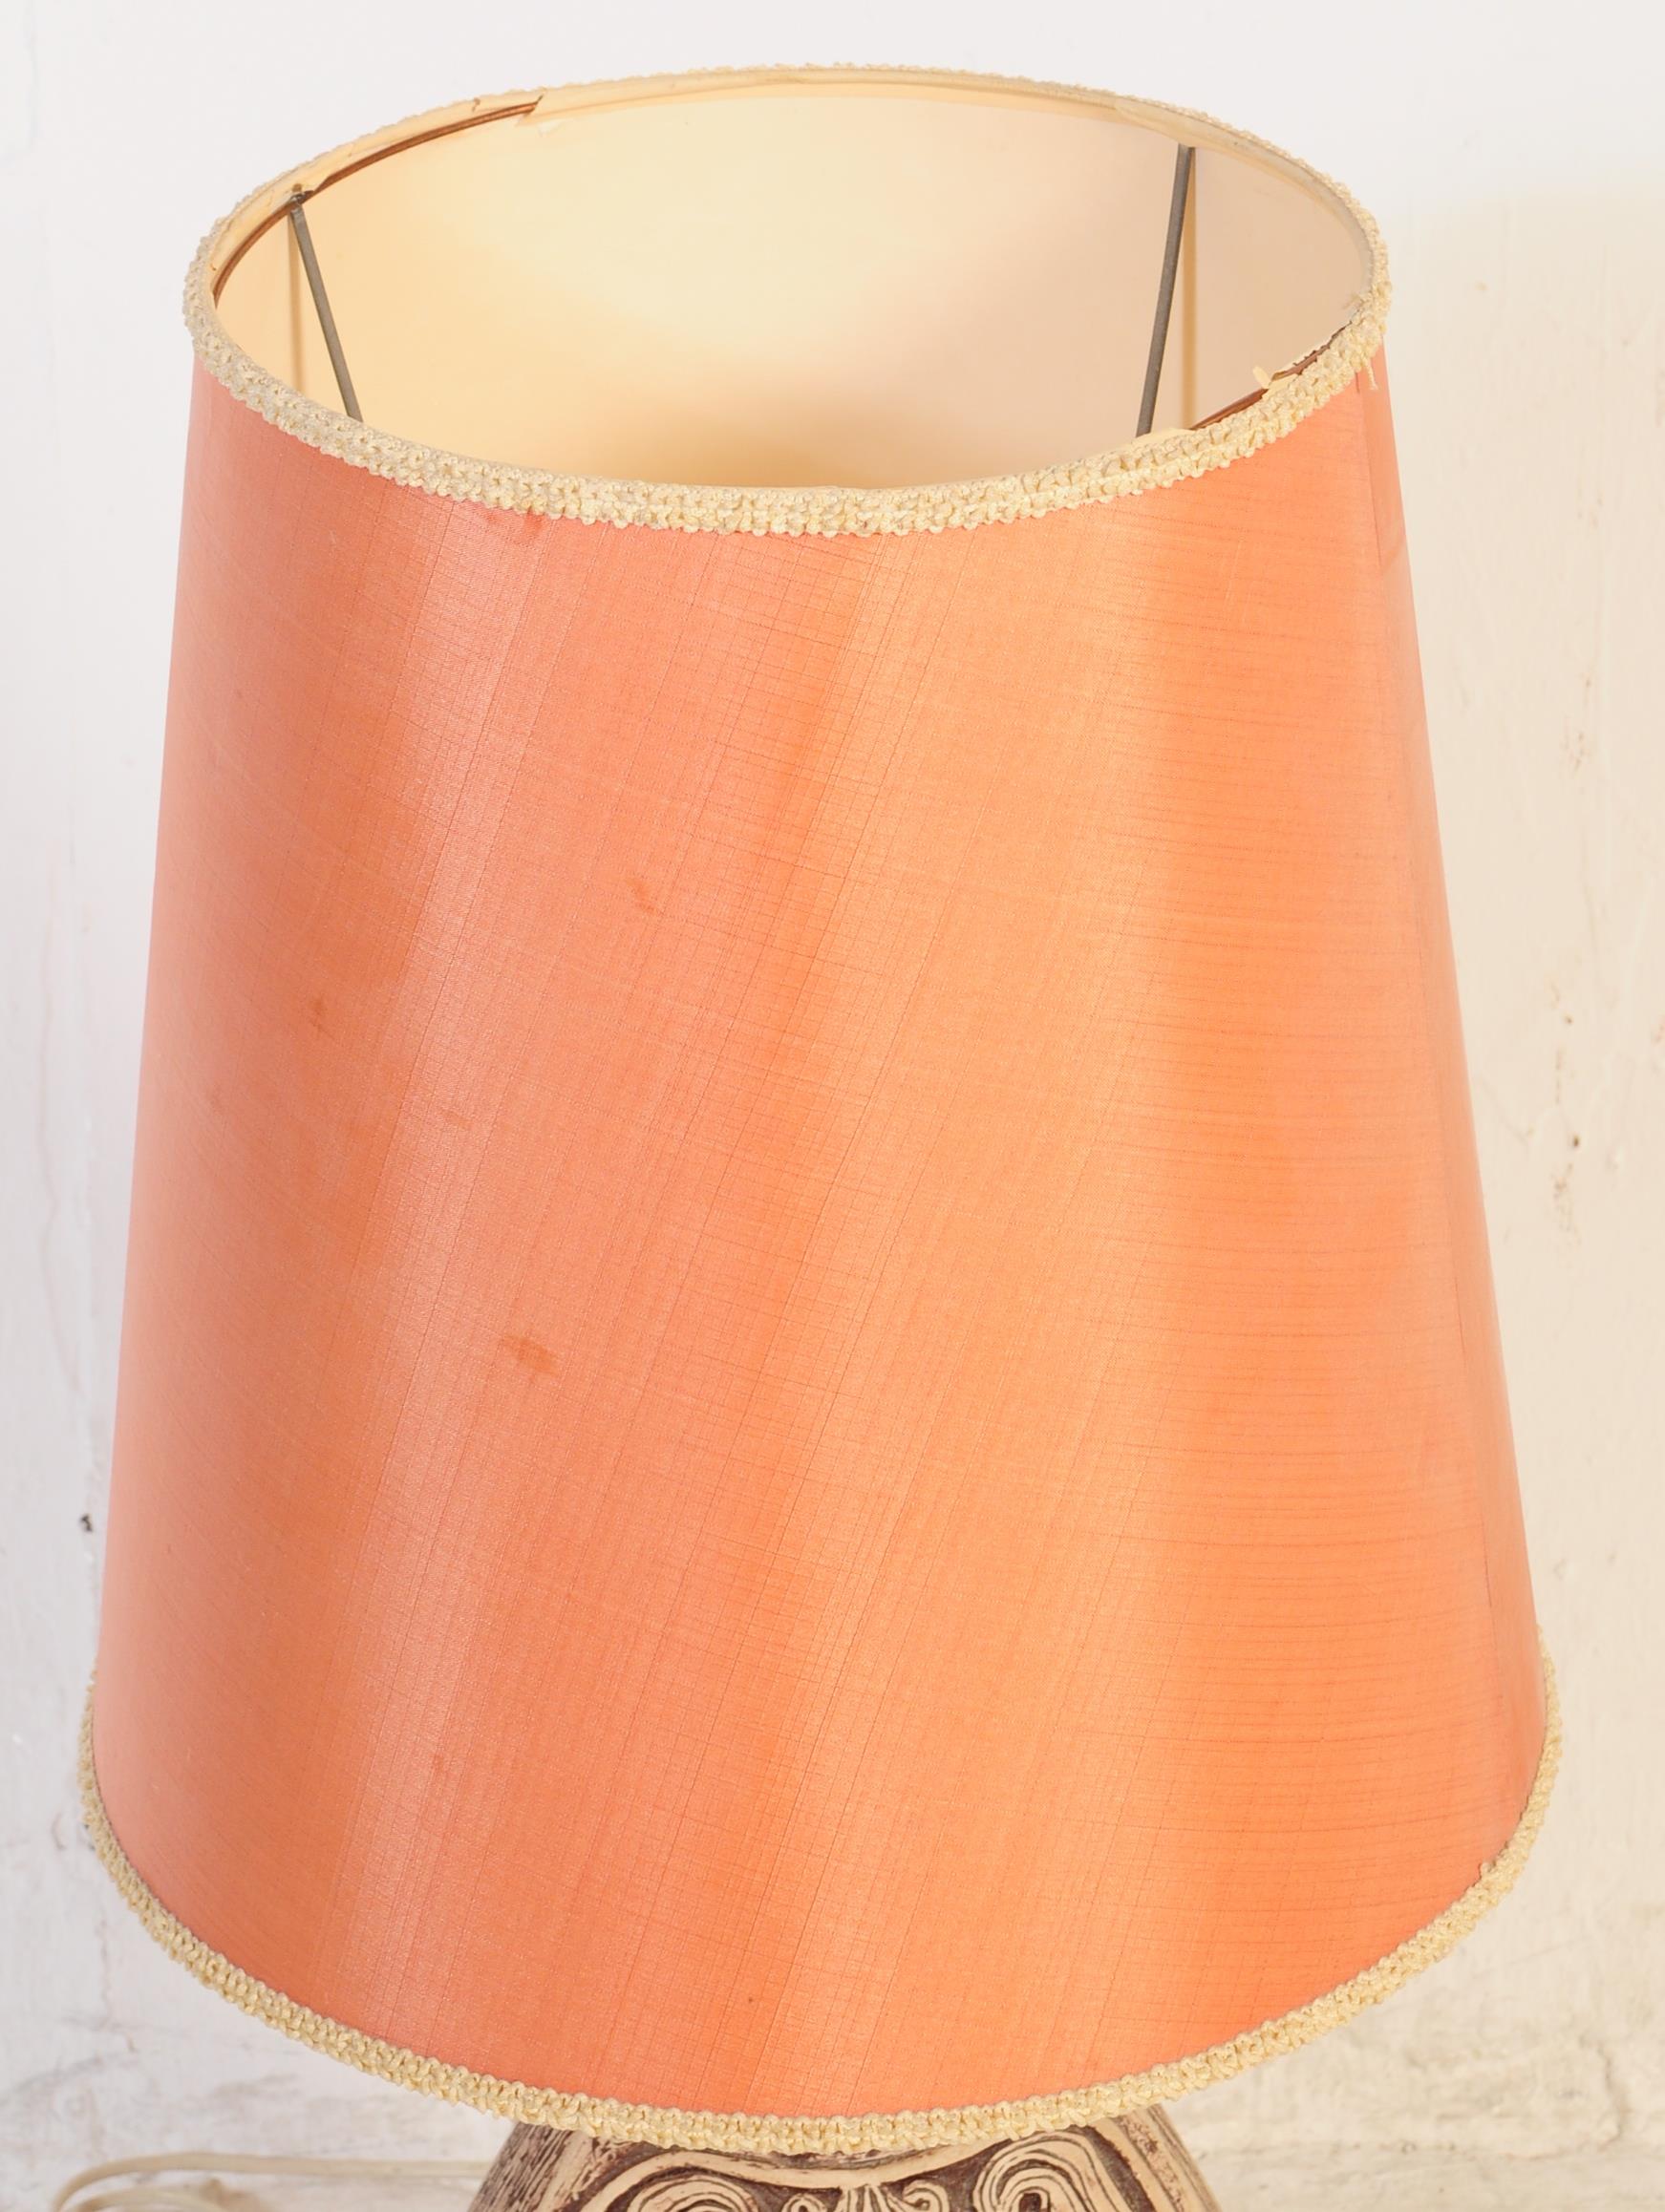 MID 20TH CENTURY CARVED CERAMIC LAMP BASE & SHADE - Image 2 of 5